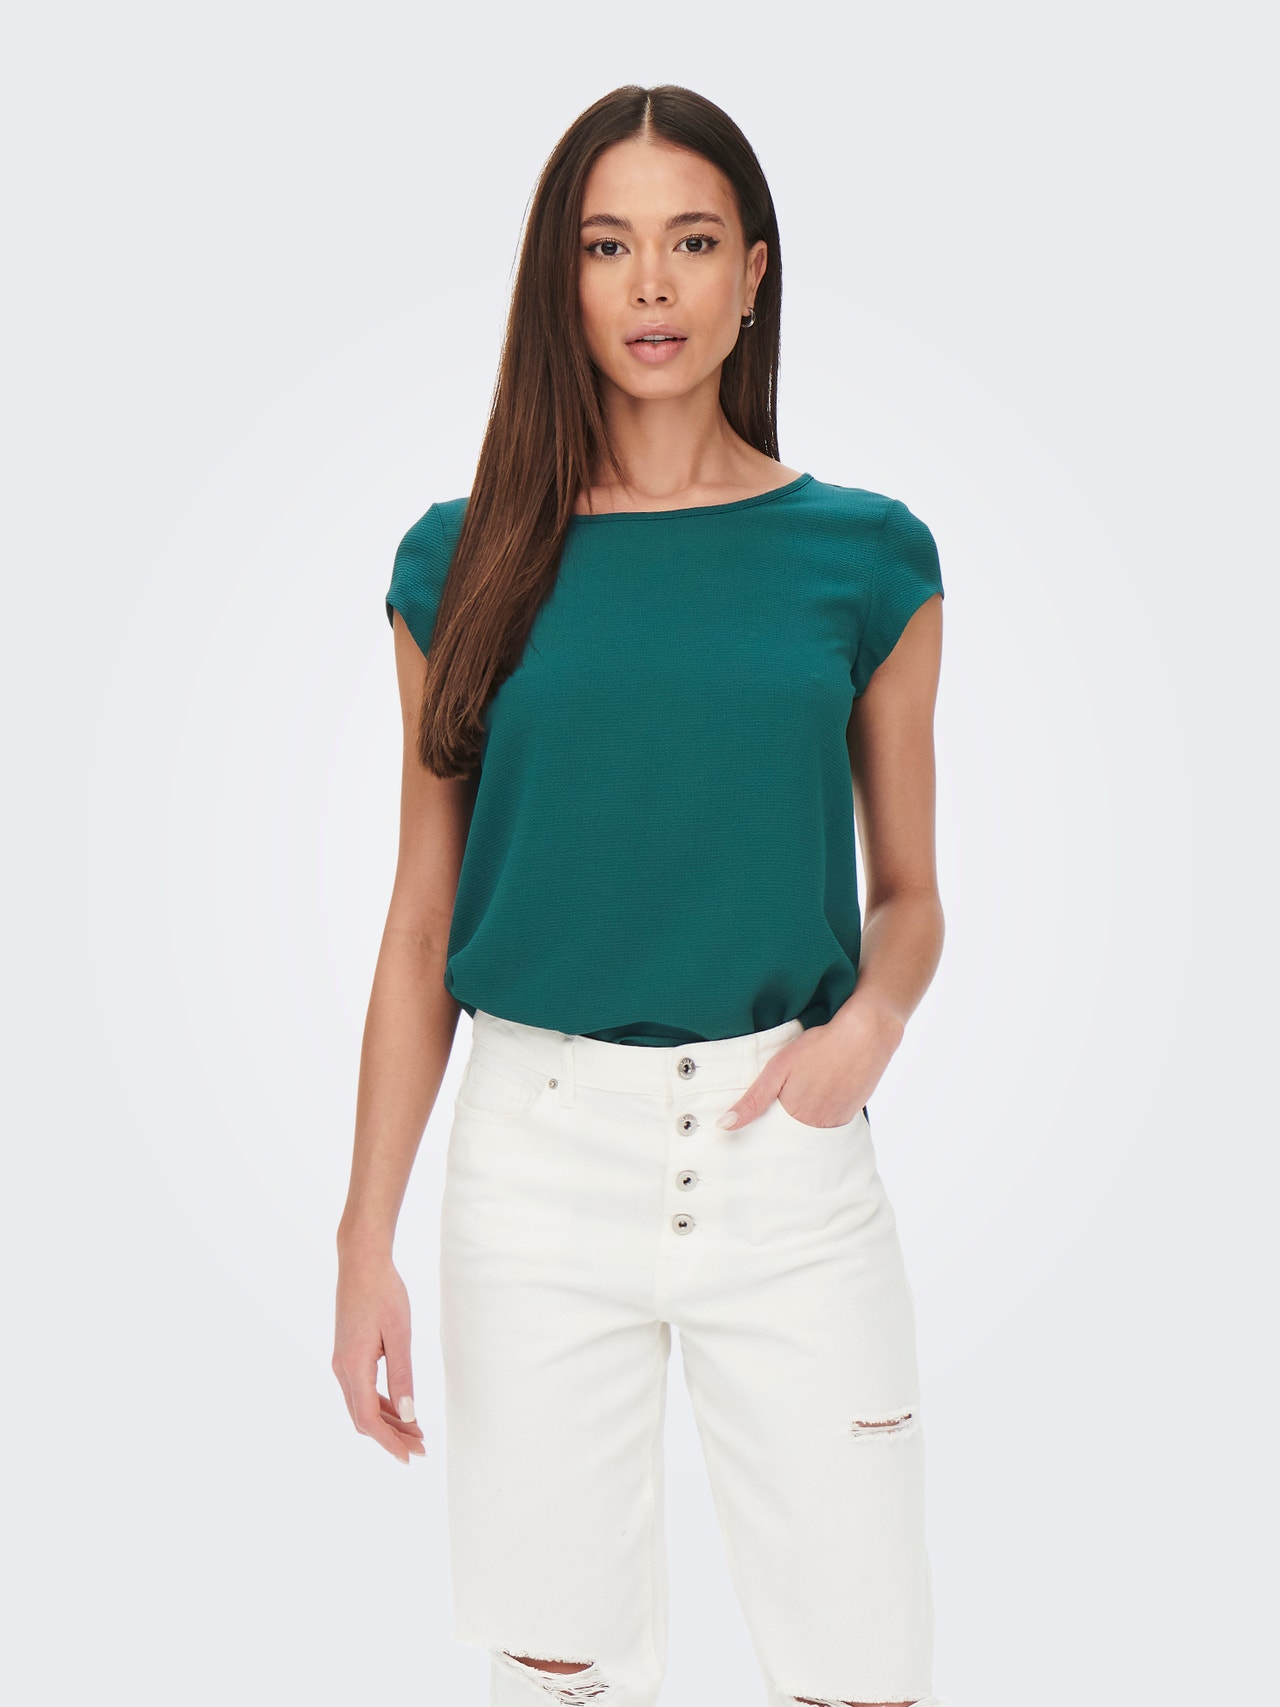 ONLY Loose Short Sleeved Top -Deep Teal - 15142784